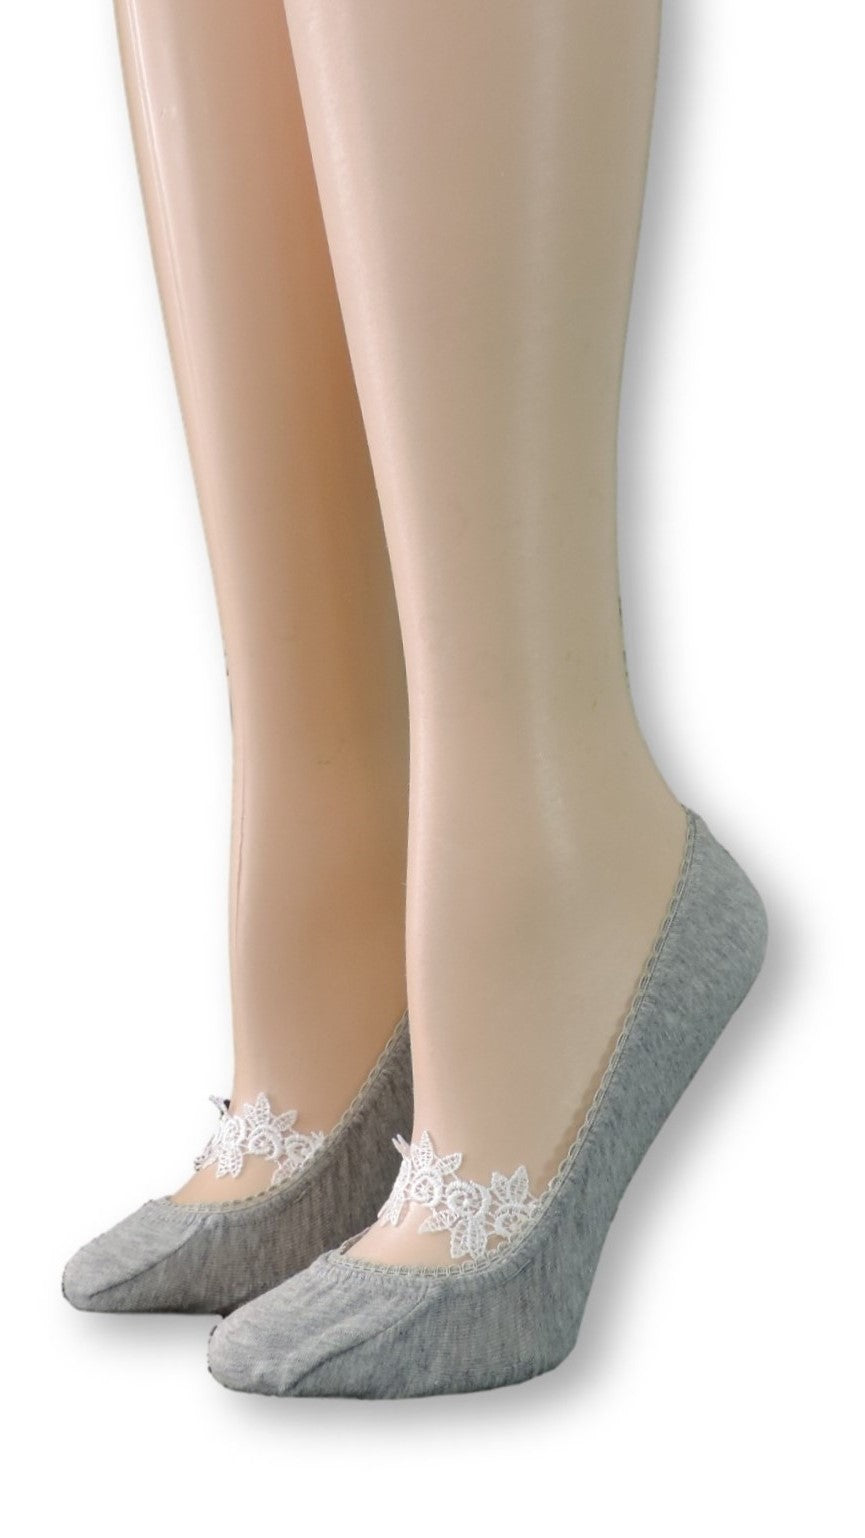 Gray Ankle Socks with White Floral Lace - Global Trendz Fashion®